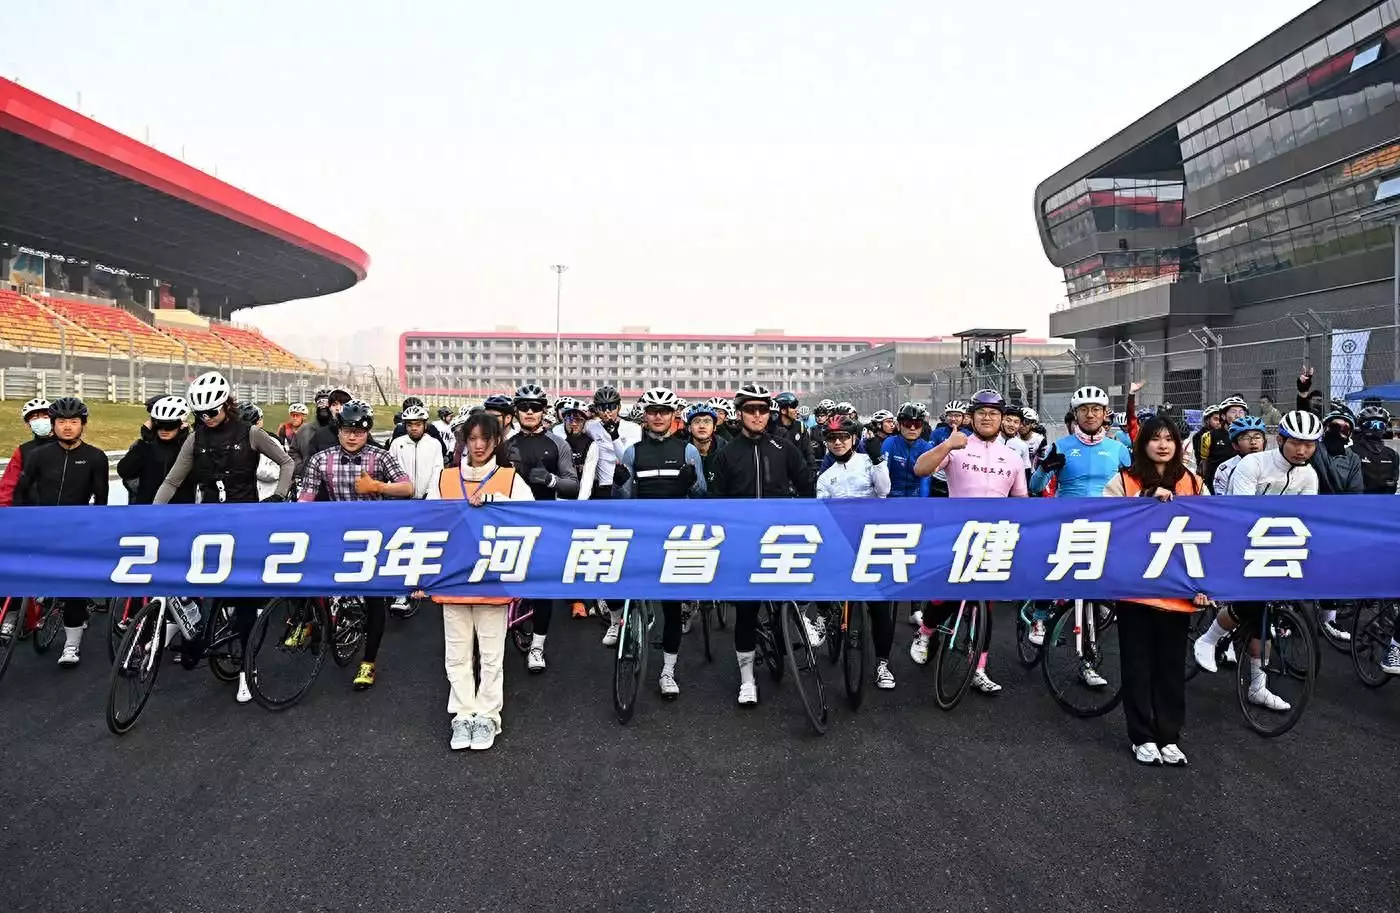 Winter Burning Exercise Passion Passionate more than a thousand bicycle enthusiasts ride Zhengzhou International Circuit broadcast articles